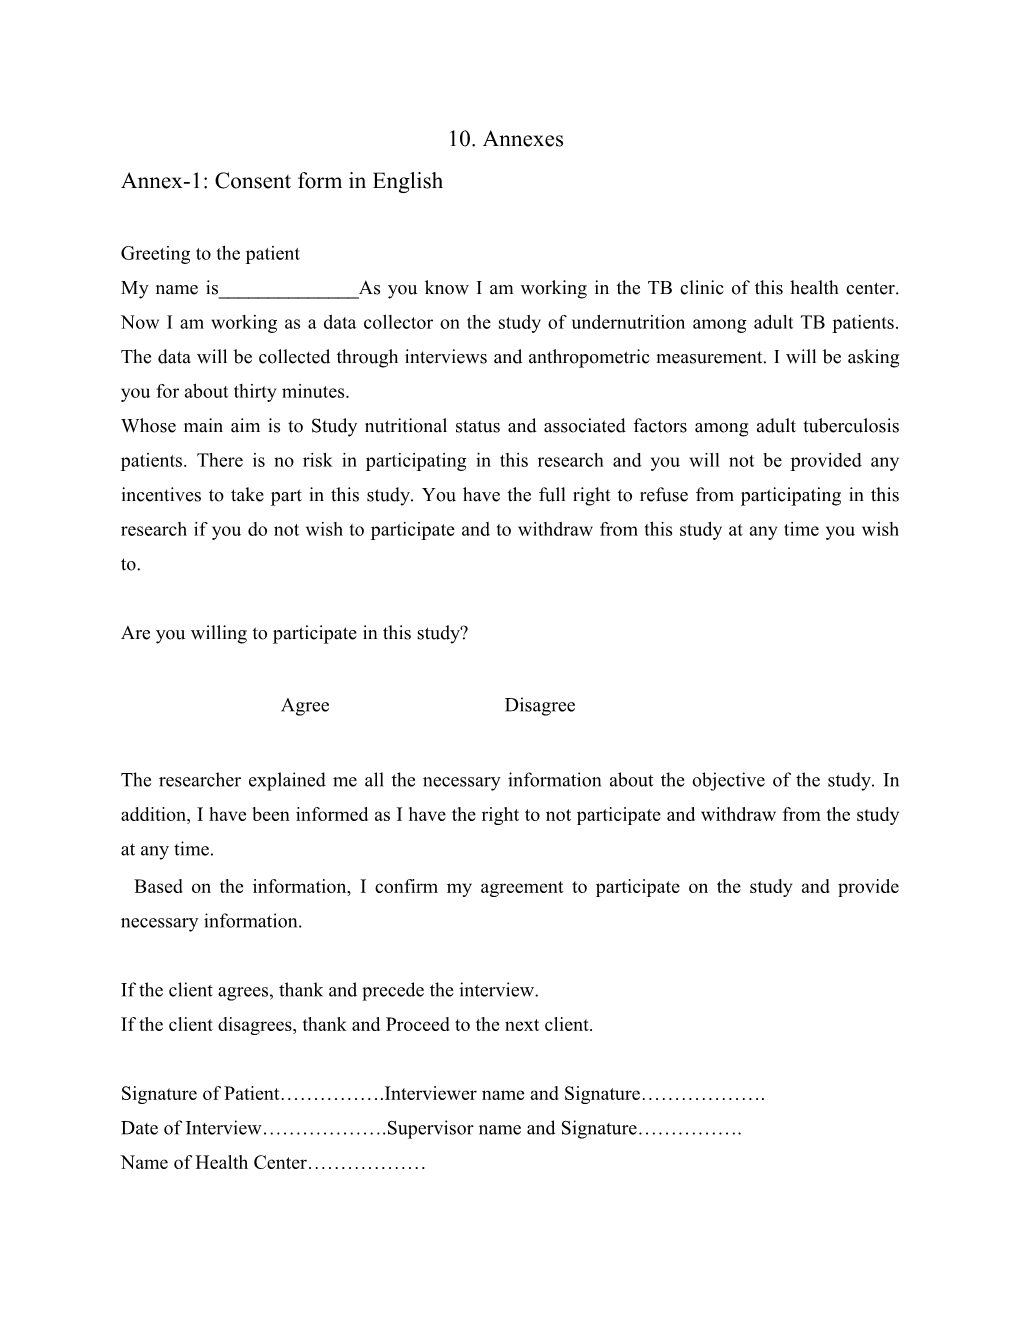 Annex-1: Consent Form in English